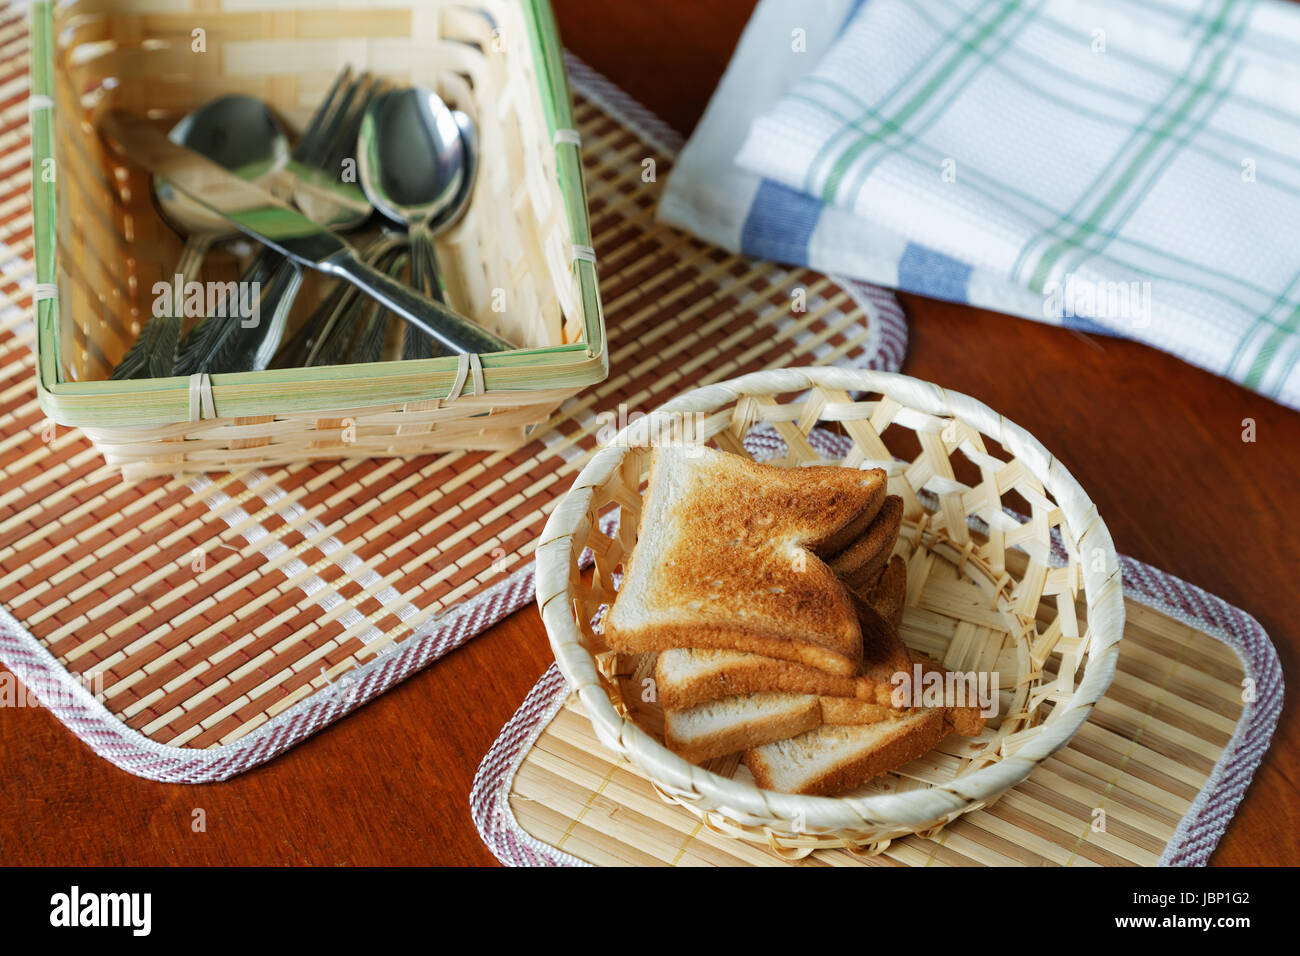 Croutons in a basket and cutlery on a table Stock Photo